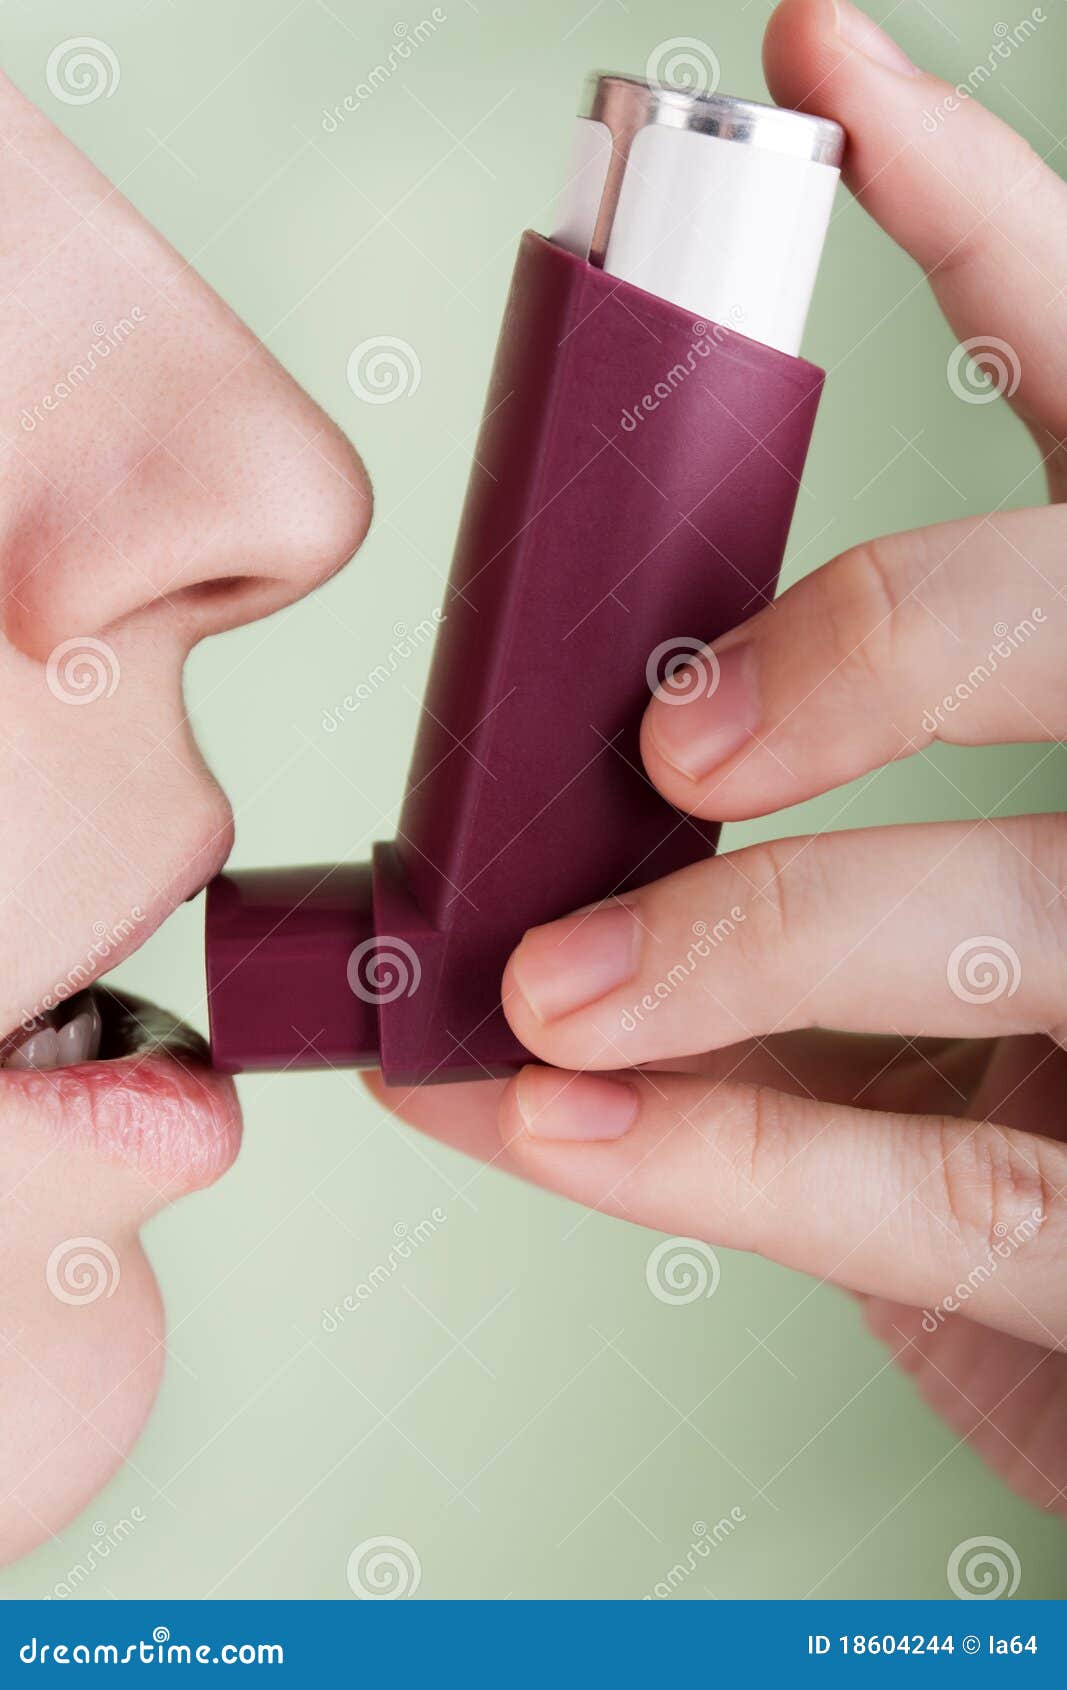 women with asthmatic inhaler